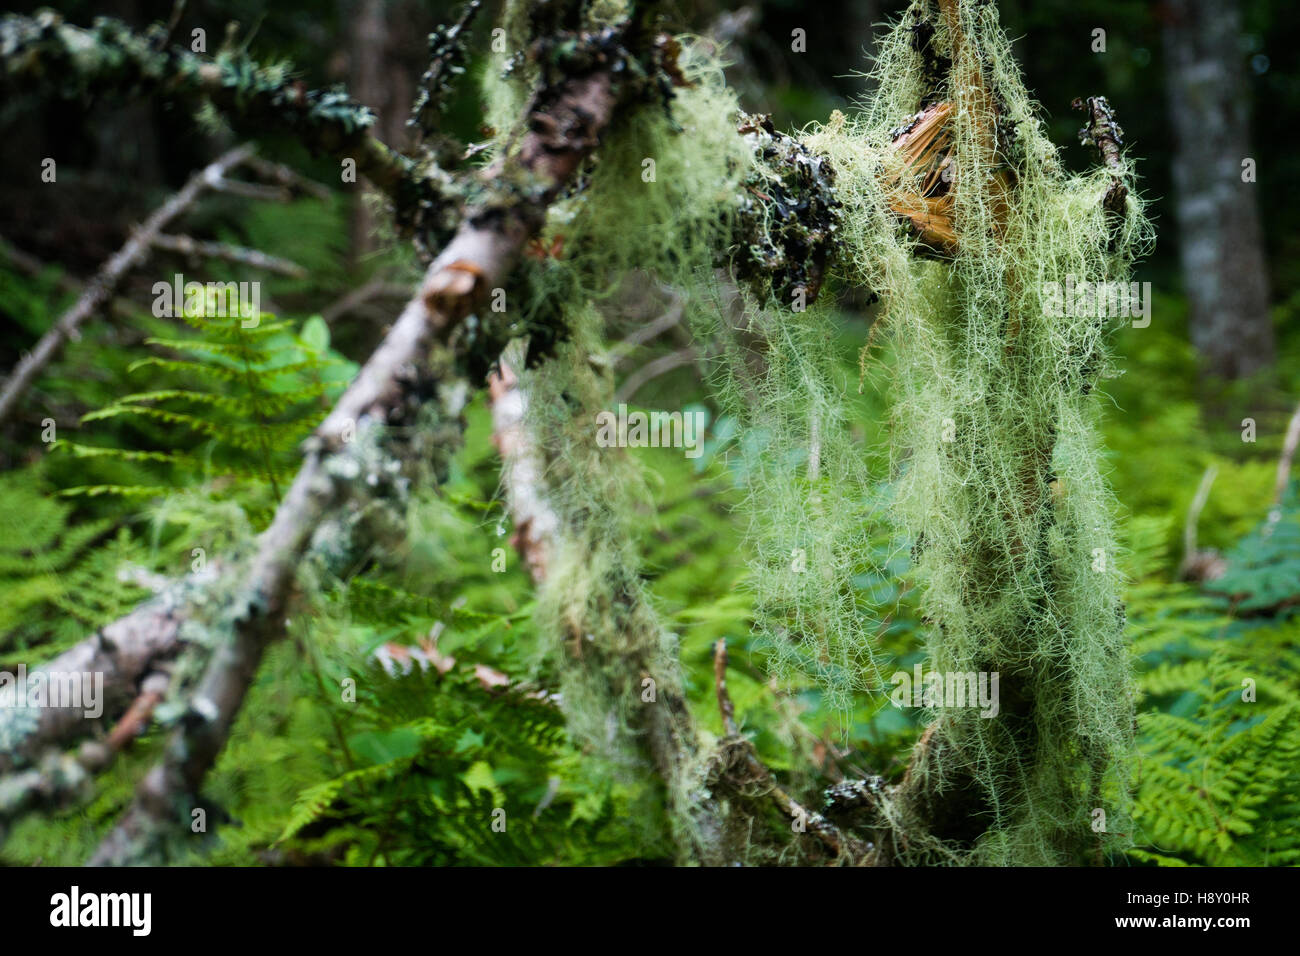 Long strings of lichen on a branch Stock Photo